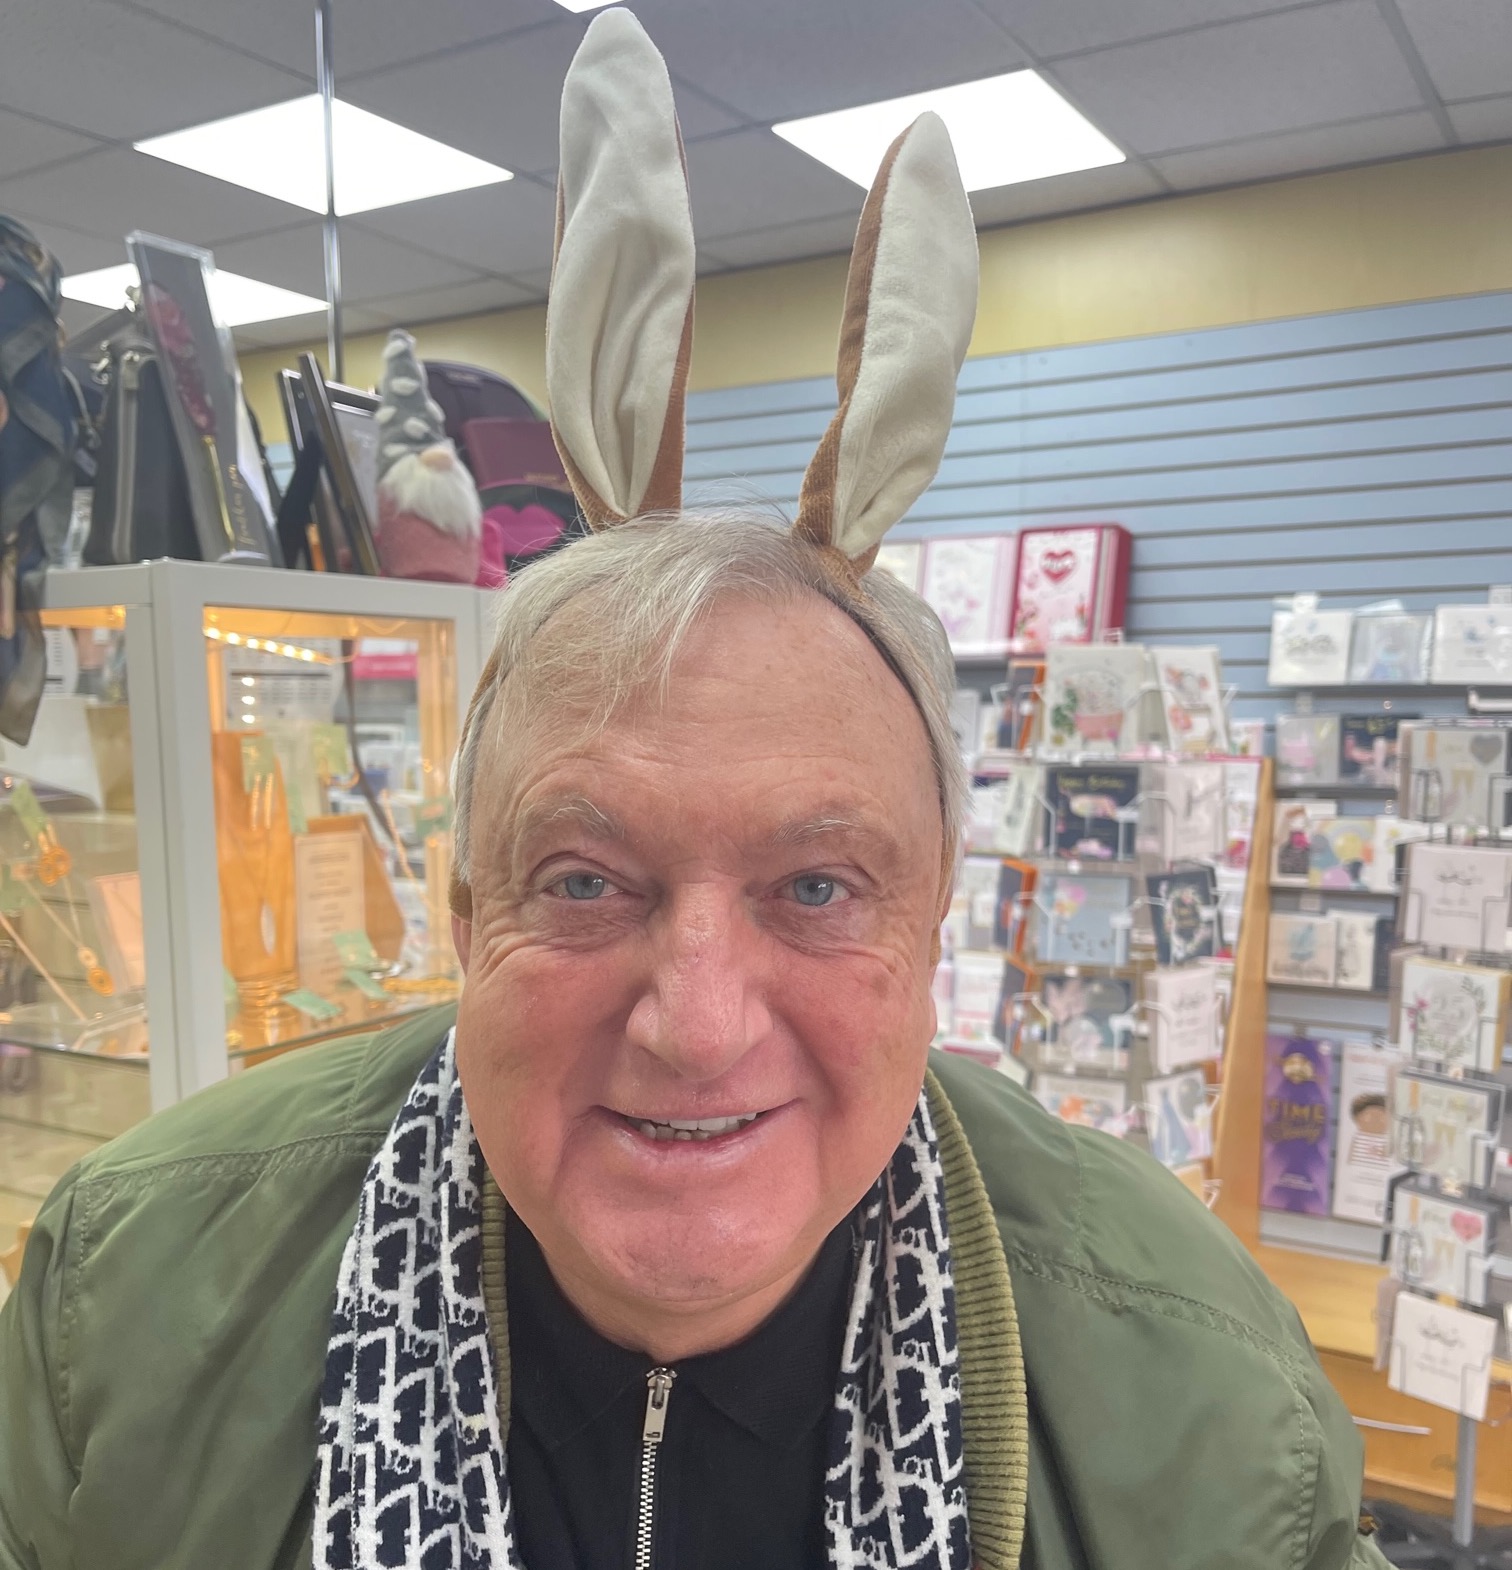 Above: Agent Carl Stirk in full bunny mode